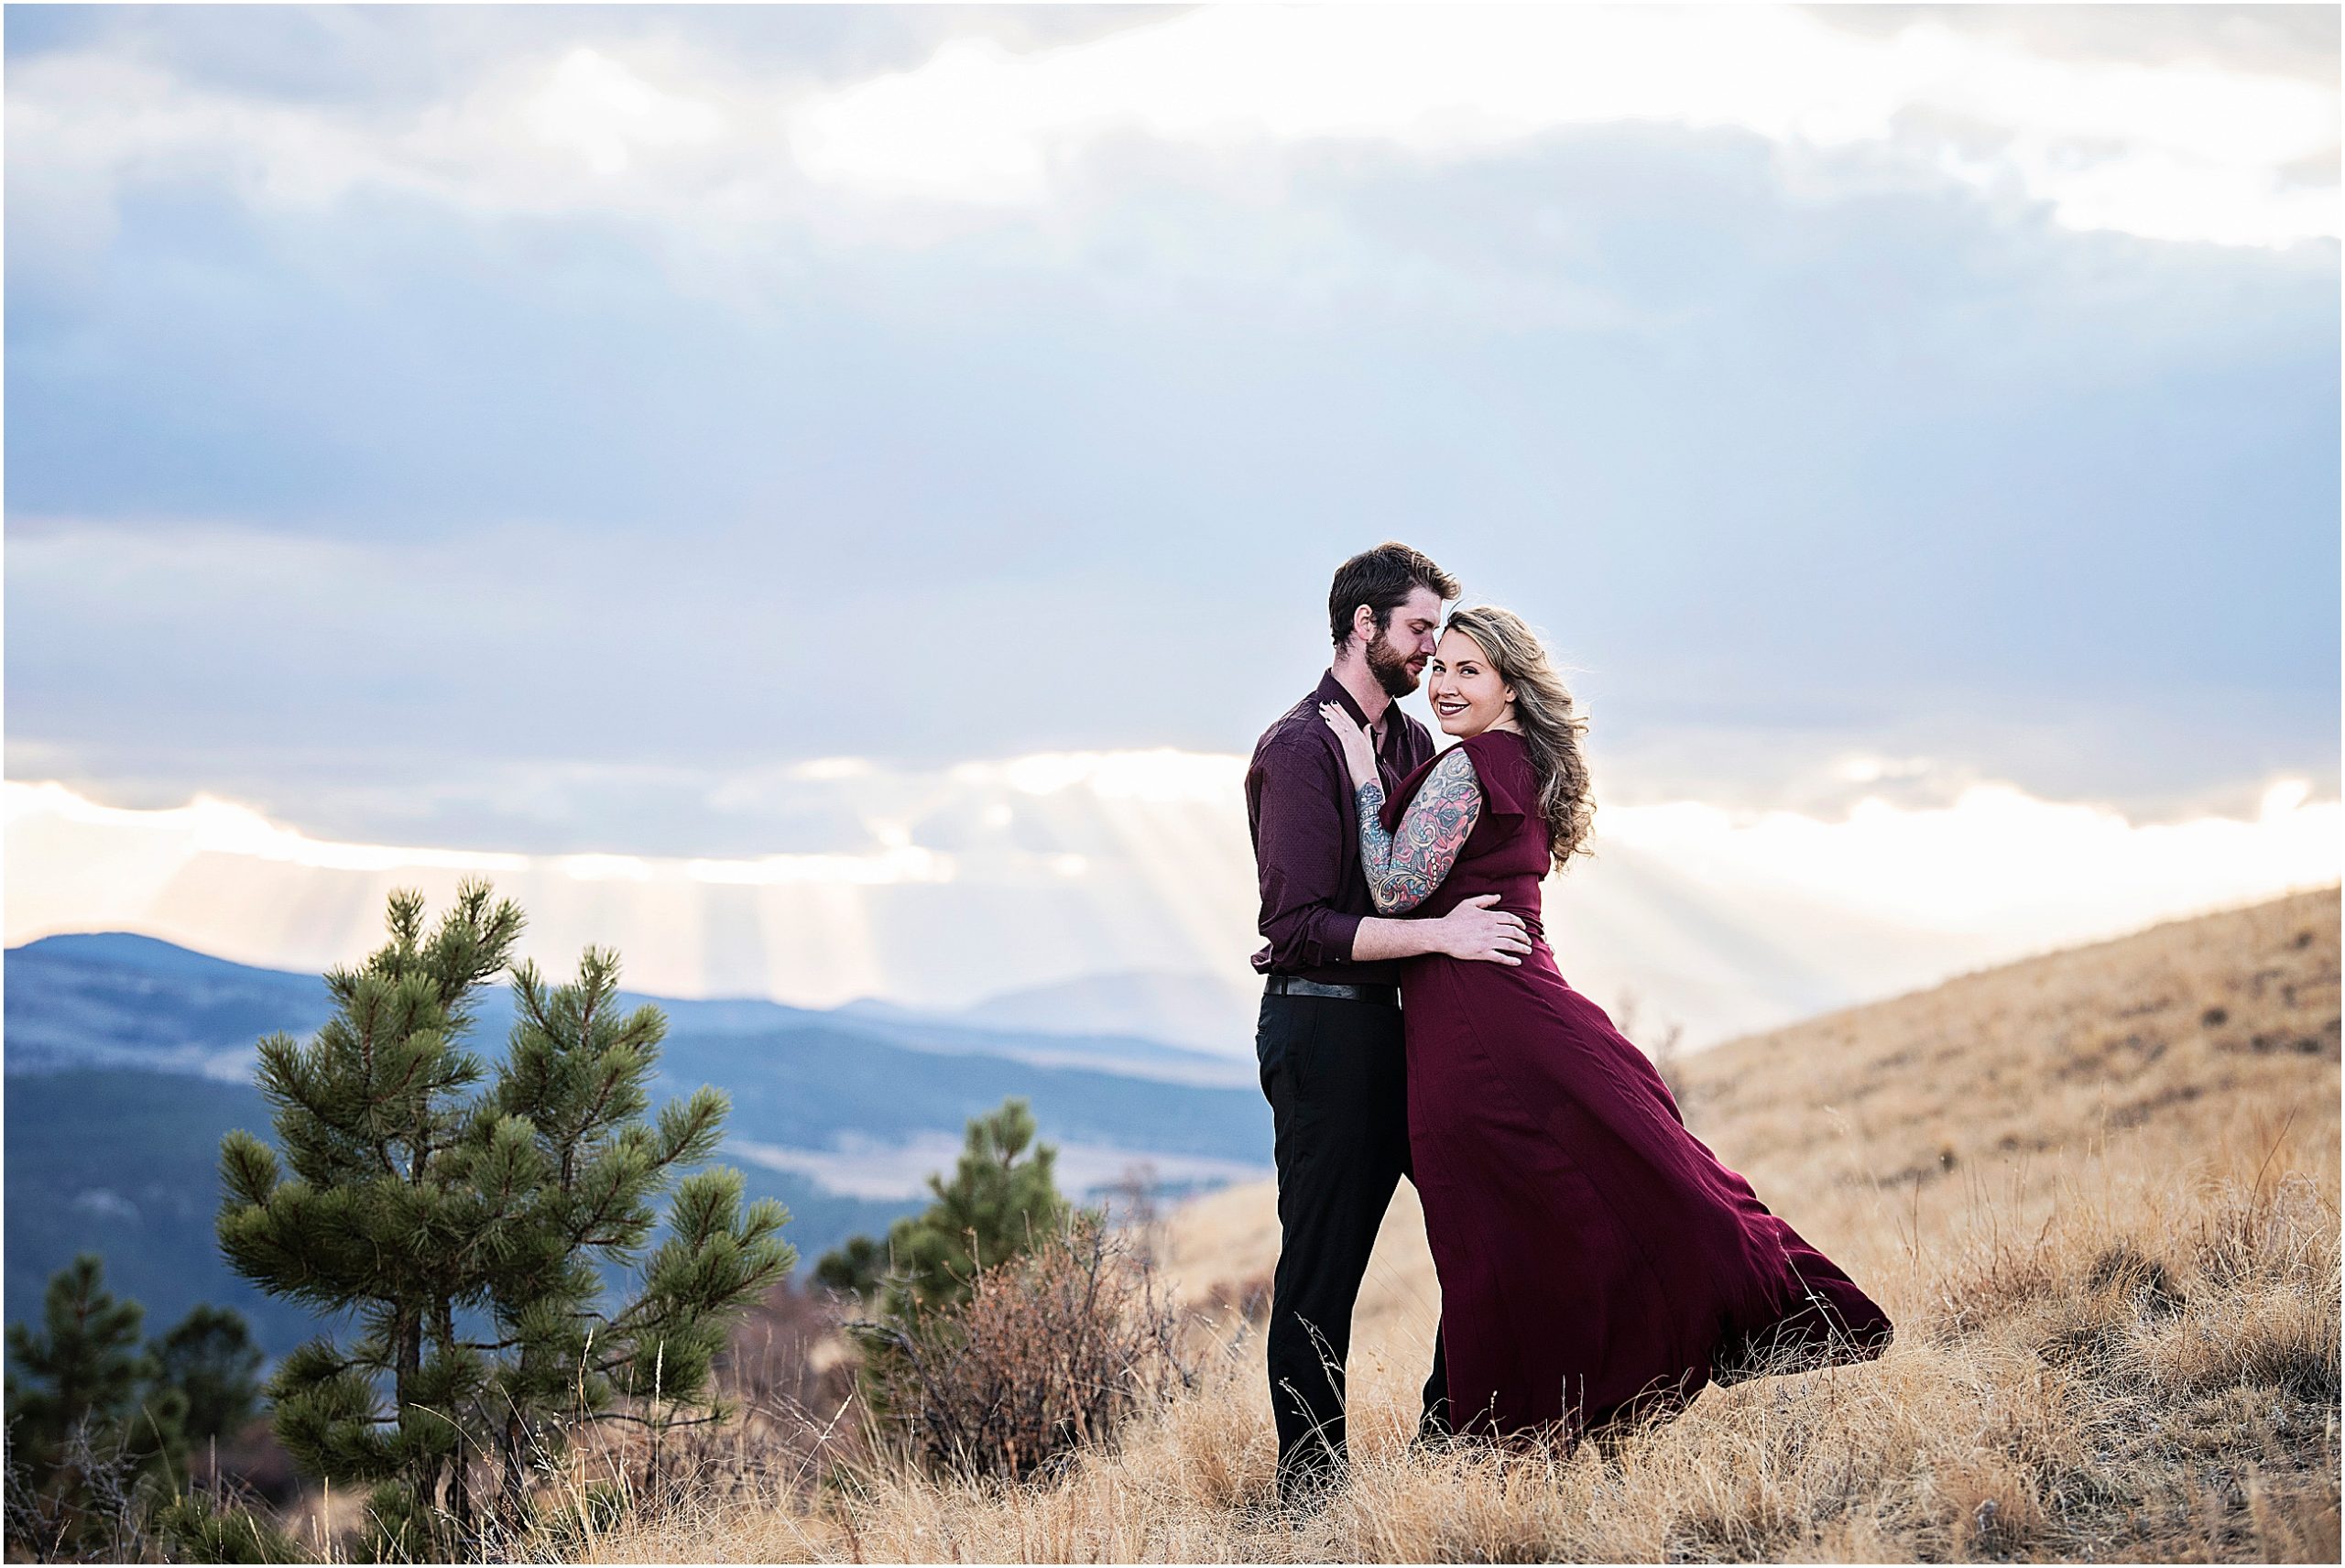 Martha's dress catches a breeze as Andrew embraces her in the mountains near Colorado Springs at sunset